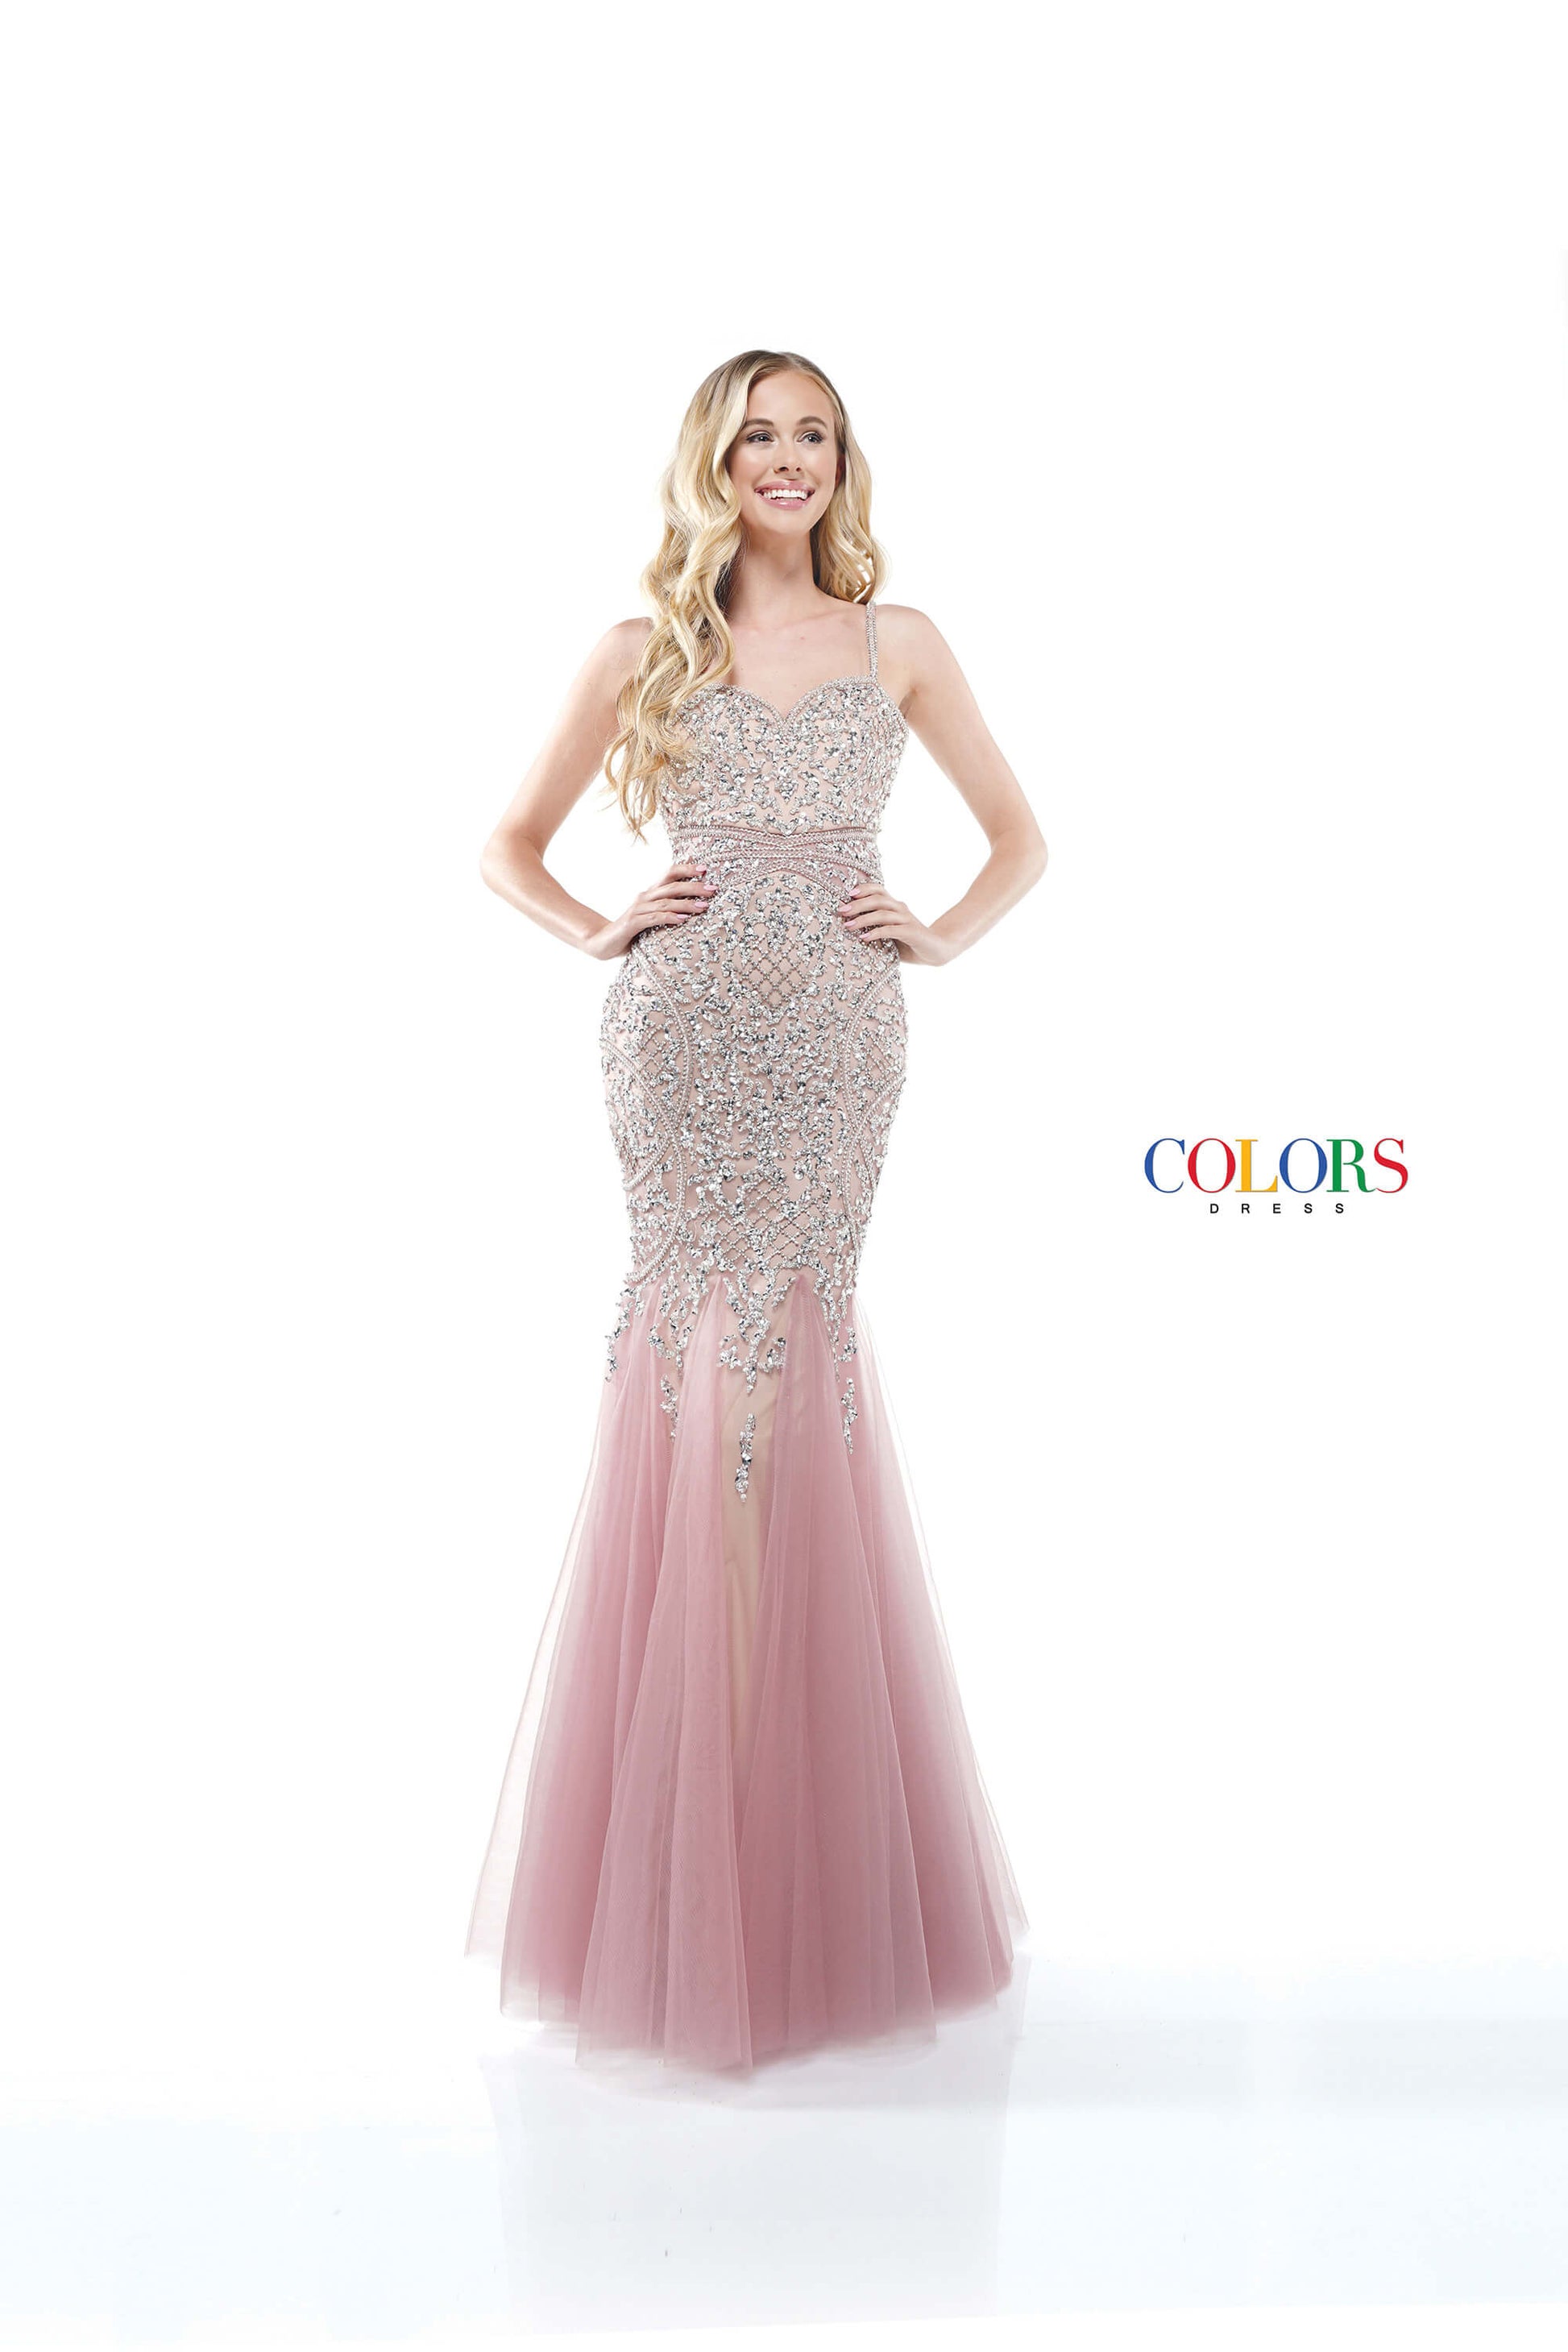 Colors Dress 2230 Mauve Mermaid Prom or Evening dress with an all over delicately beaded bodice mermaid dress in sweet heart neckline, tulle godet, beaded strap